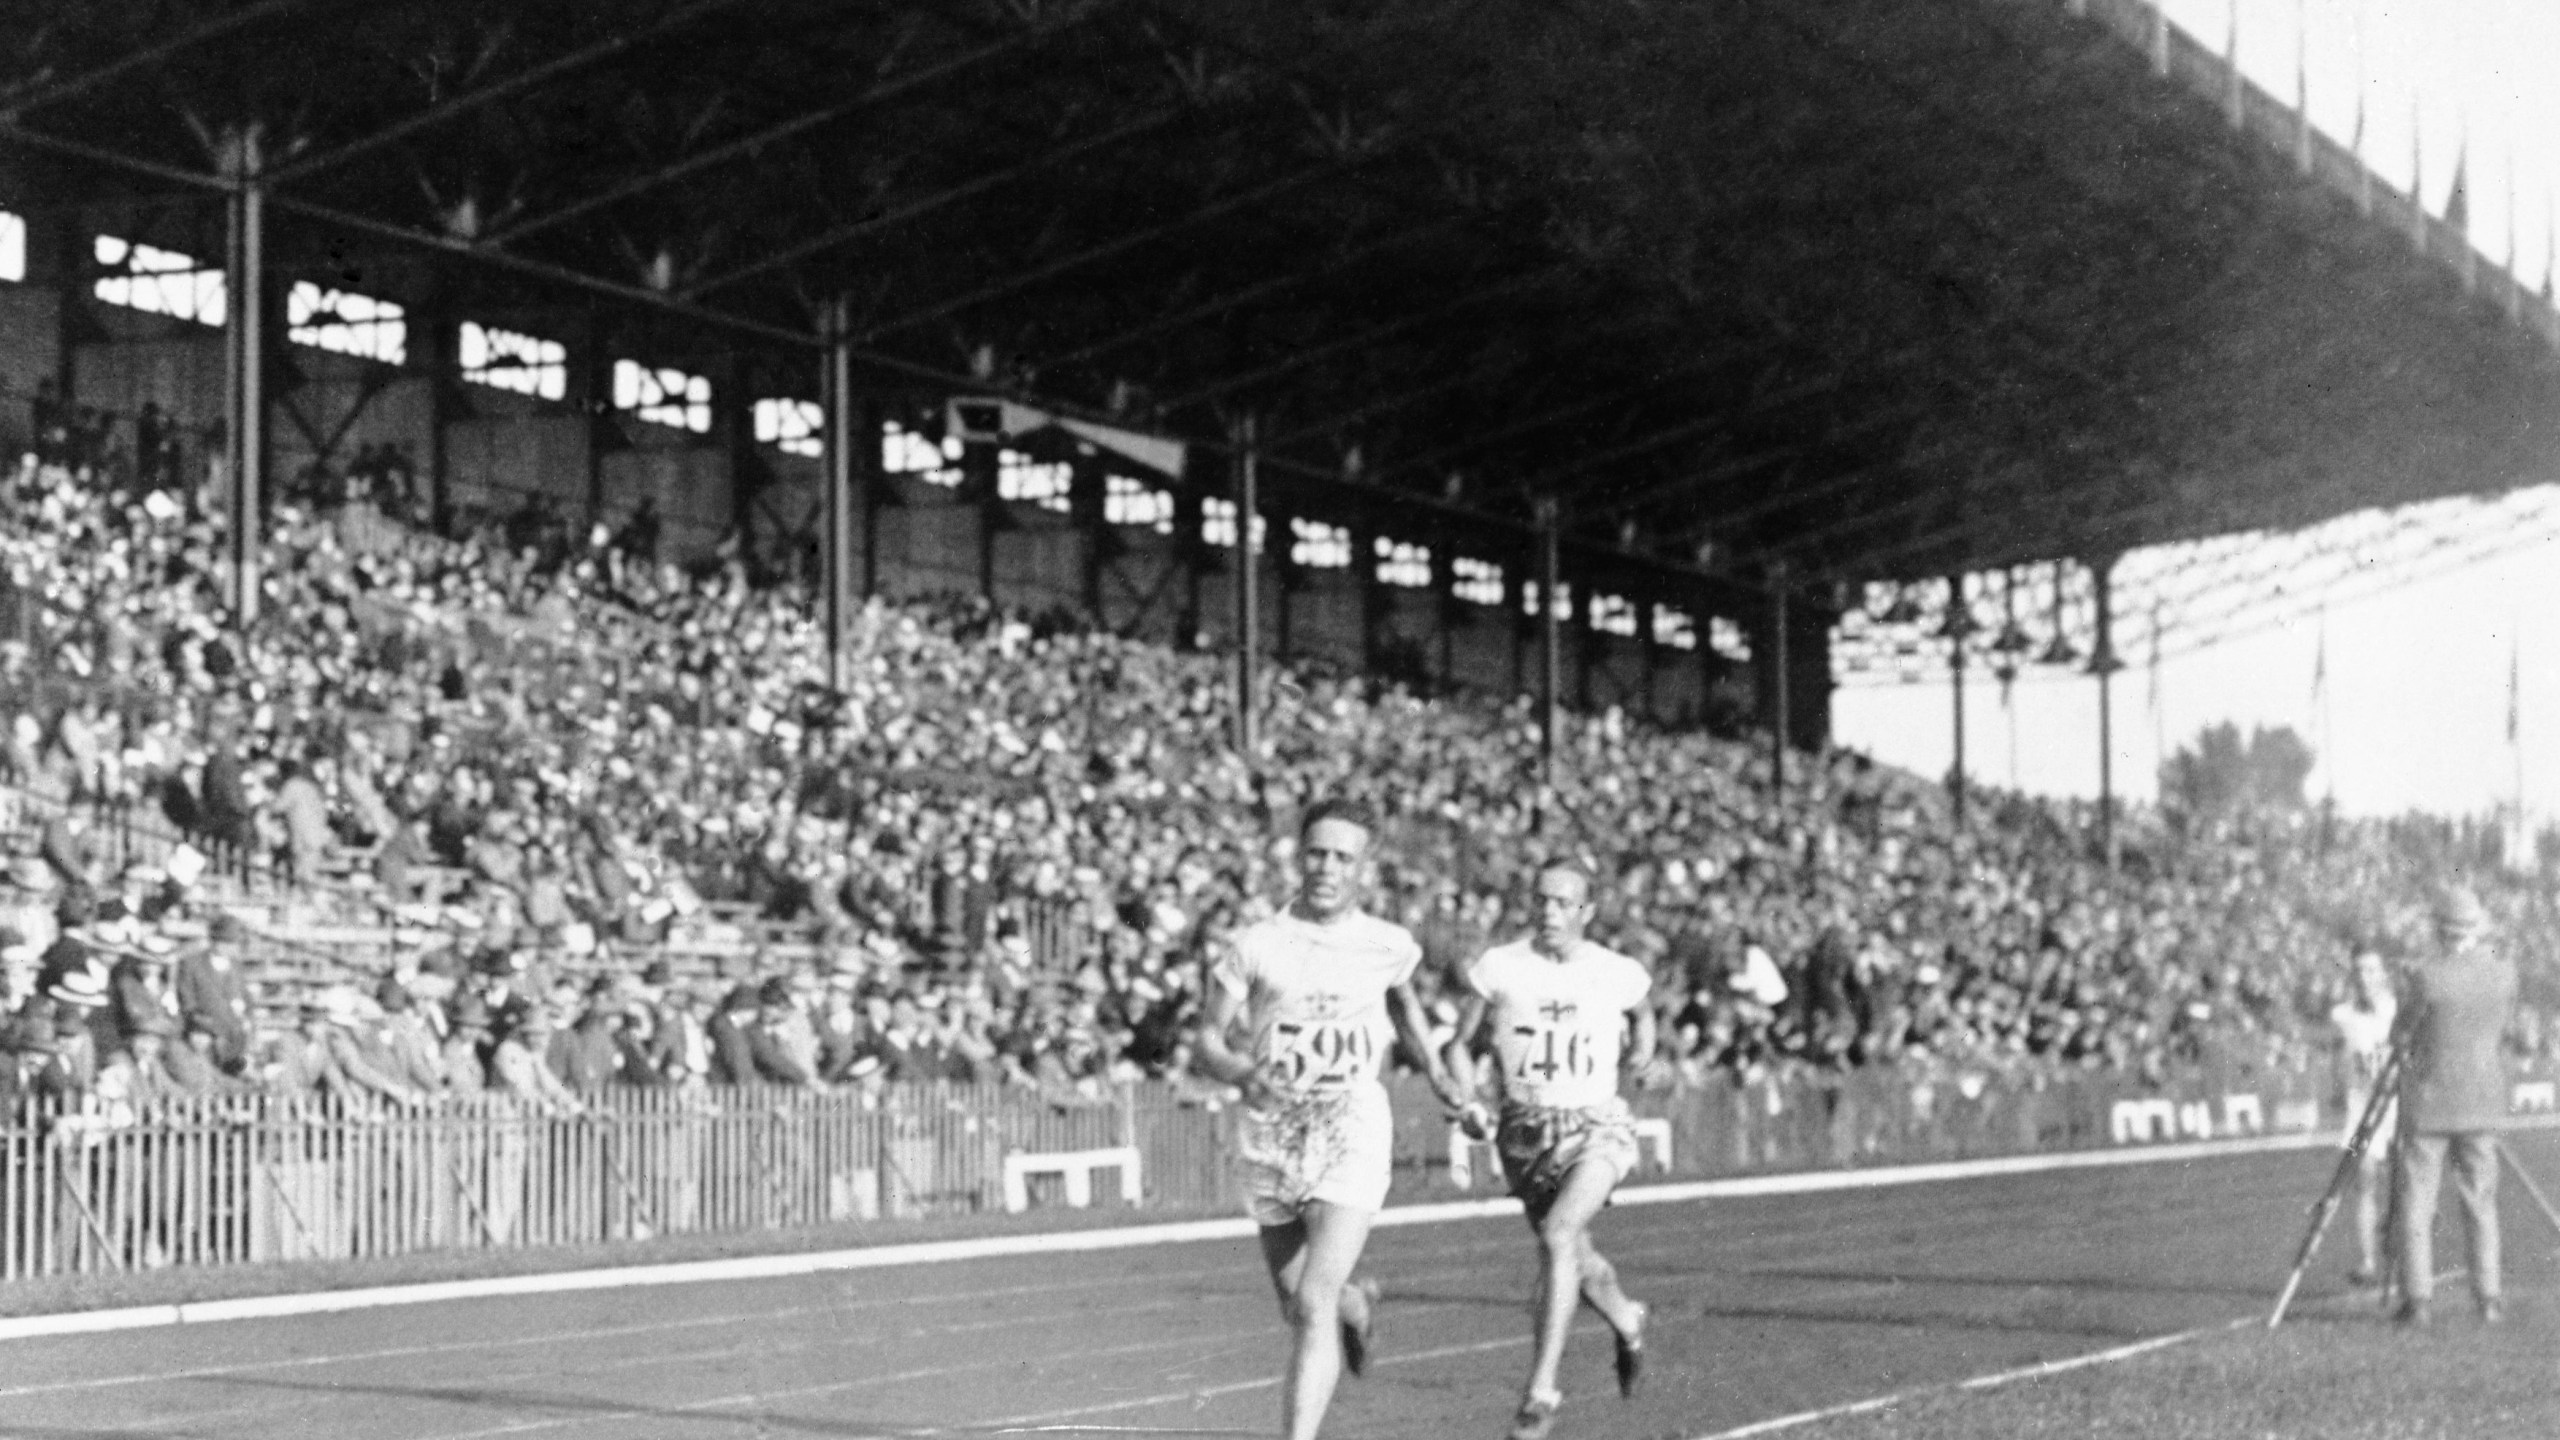 FILE - Vilho Ritola, of Finland, leads the field during the men's 10,000-meter race at the 1924 Olympics in Paris, In this 1924 file photo. Ritola won the gold medal for the event. Ahead of this summer's Paris Olympics, an exhibit in the French capital shows how the Games have been a "mirror of society" since the beginning of the 20th century. (AP Photo/File)